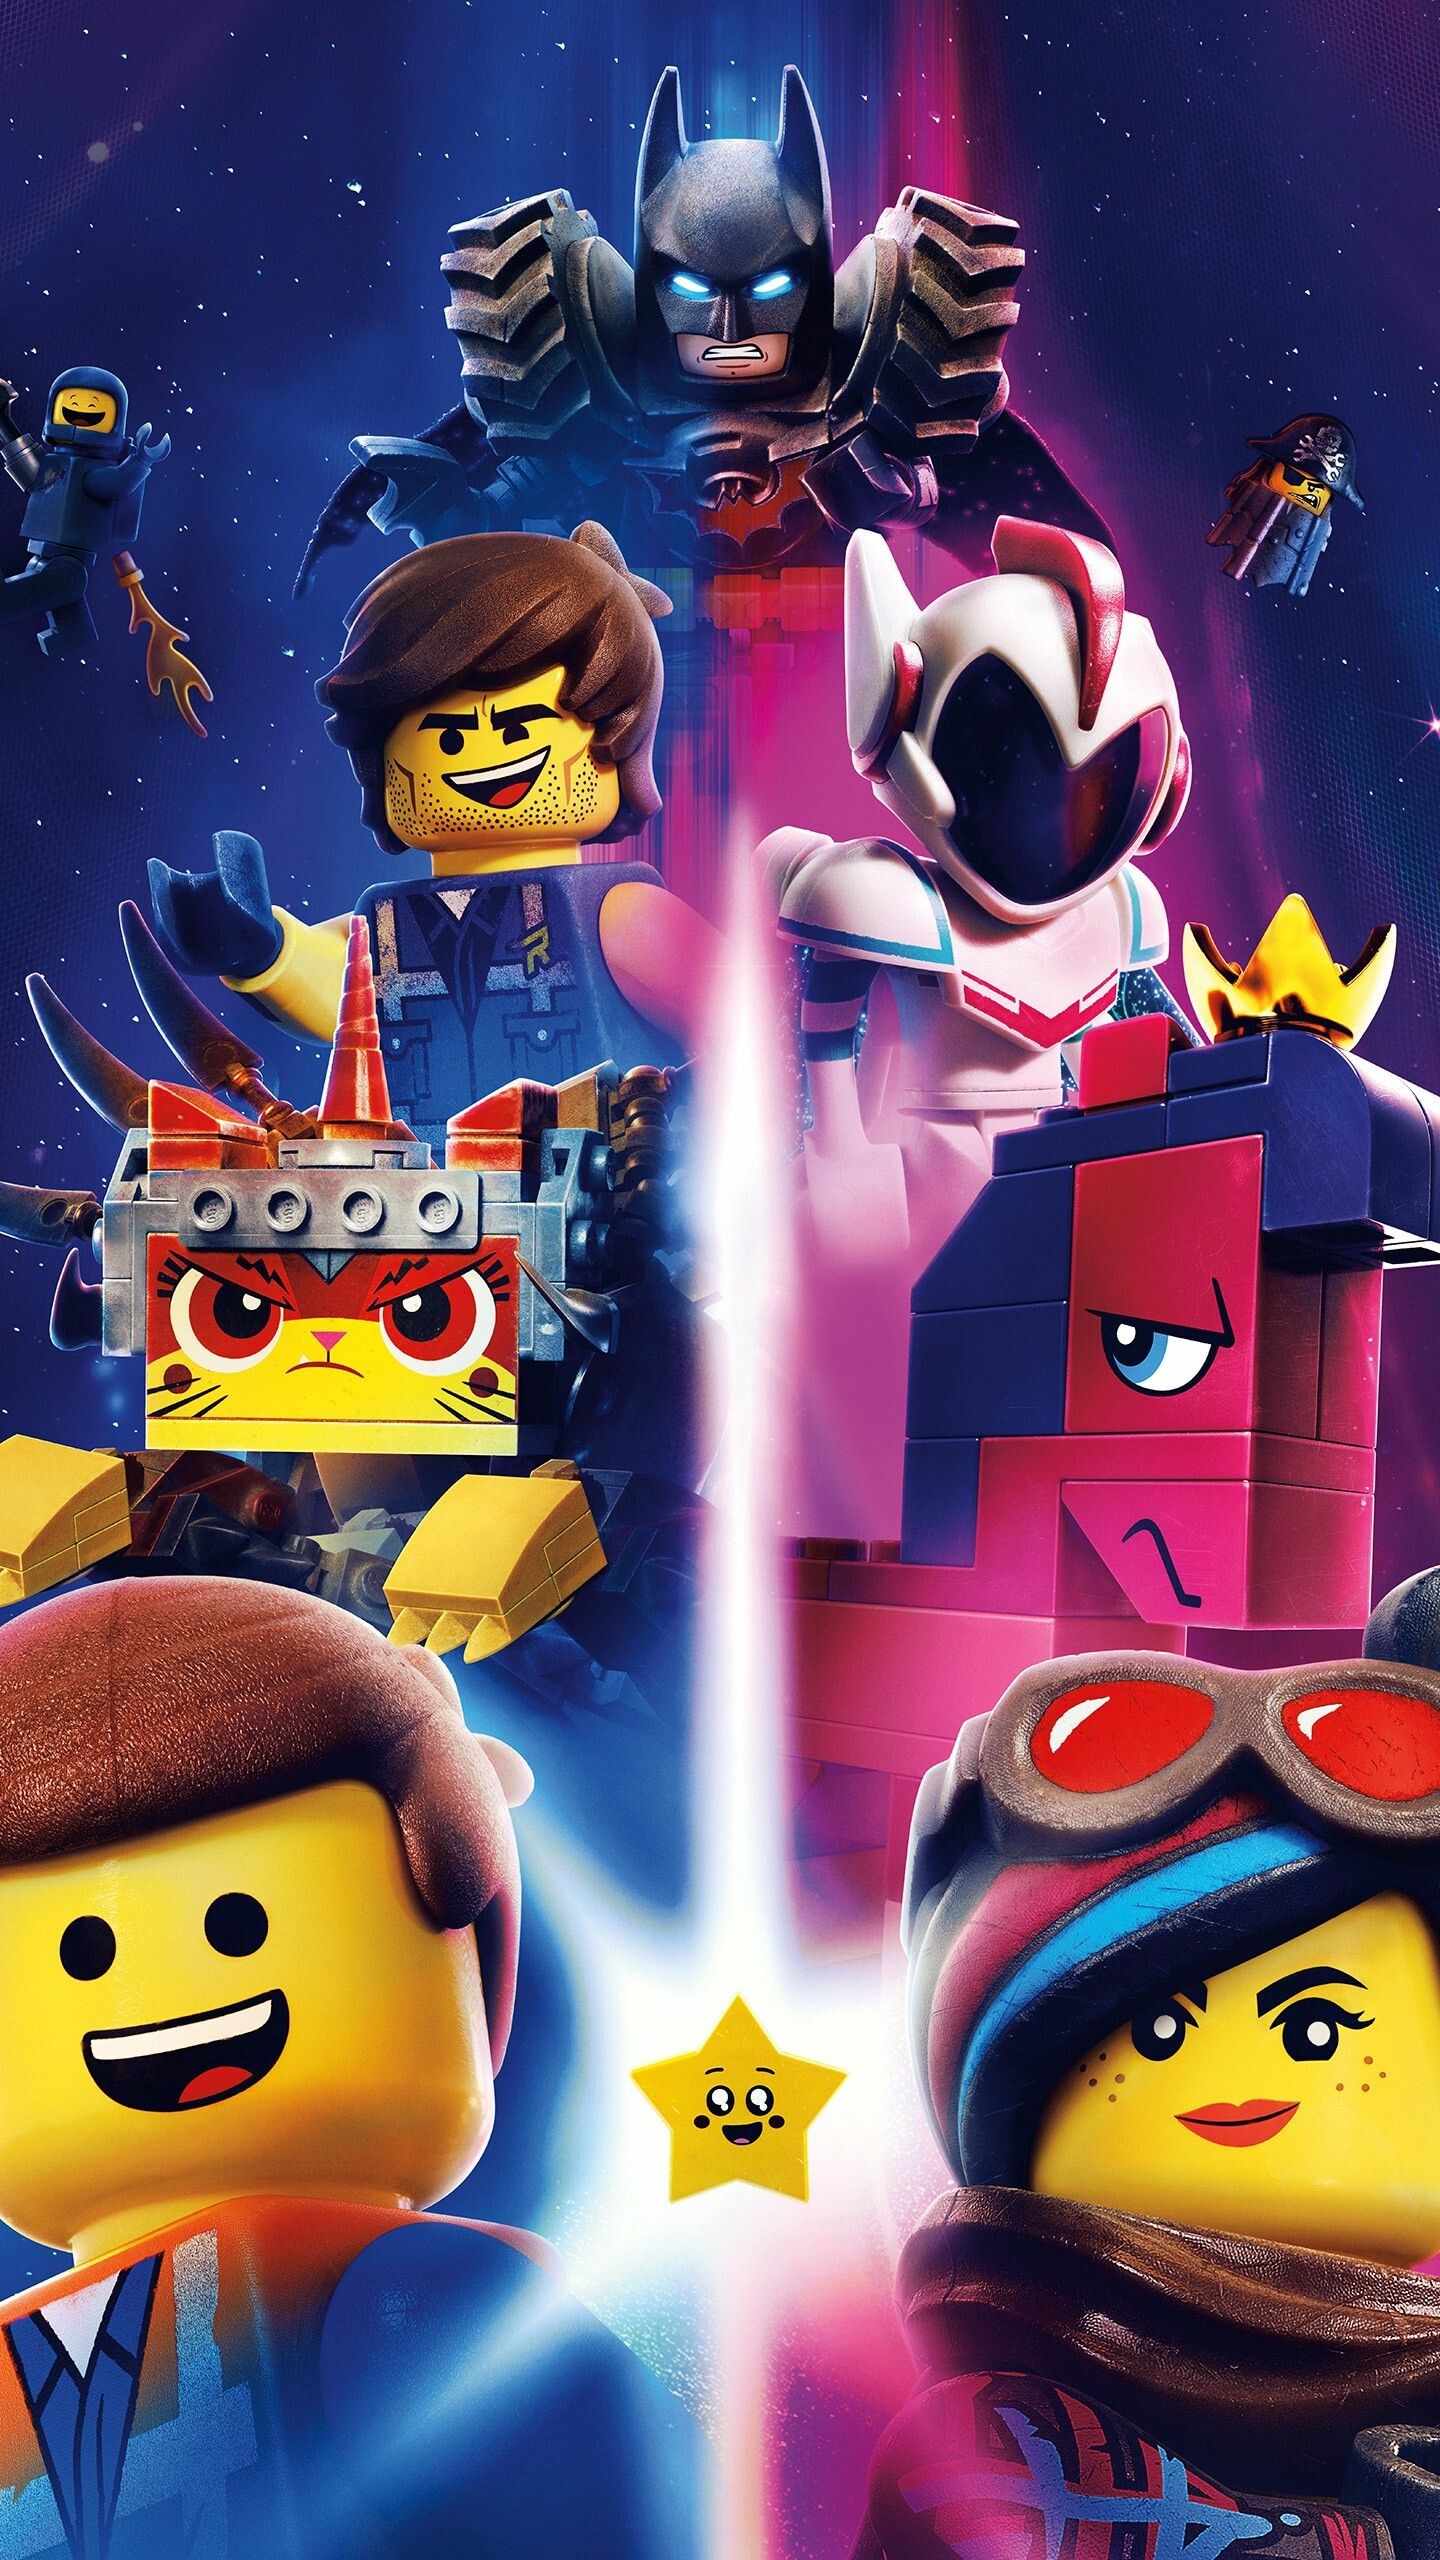 Lego: Can be purchased in retail stores, online, or through catalogs. 1440x2560 HD Background.